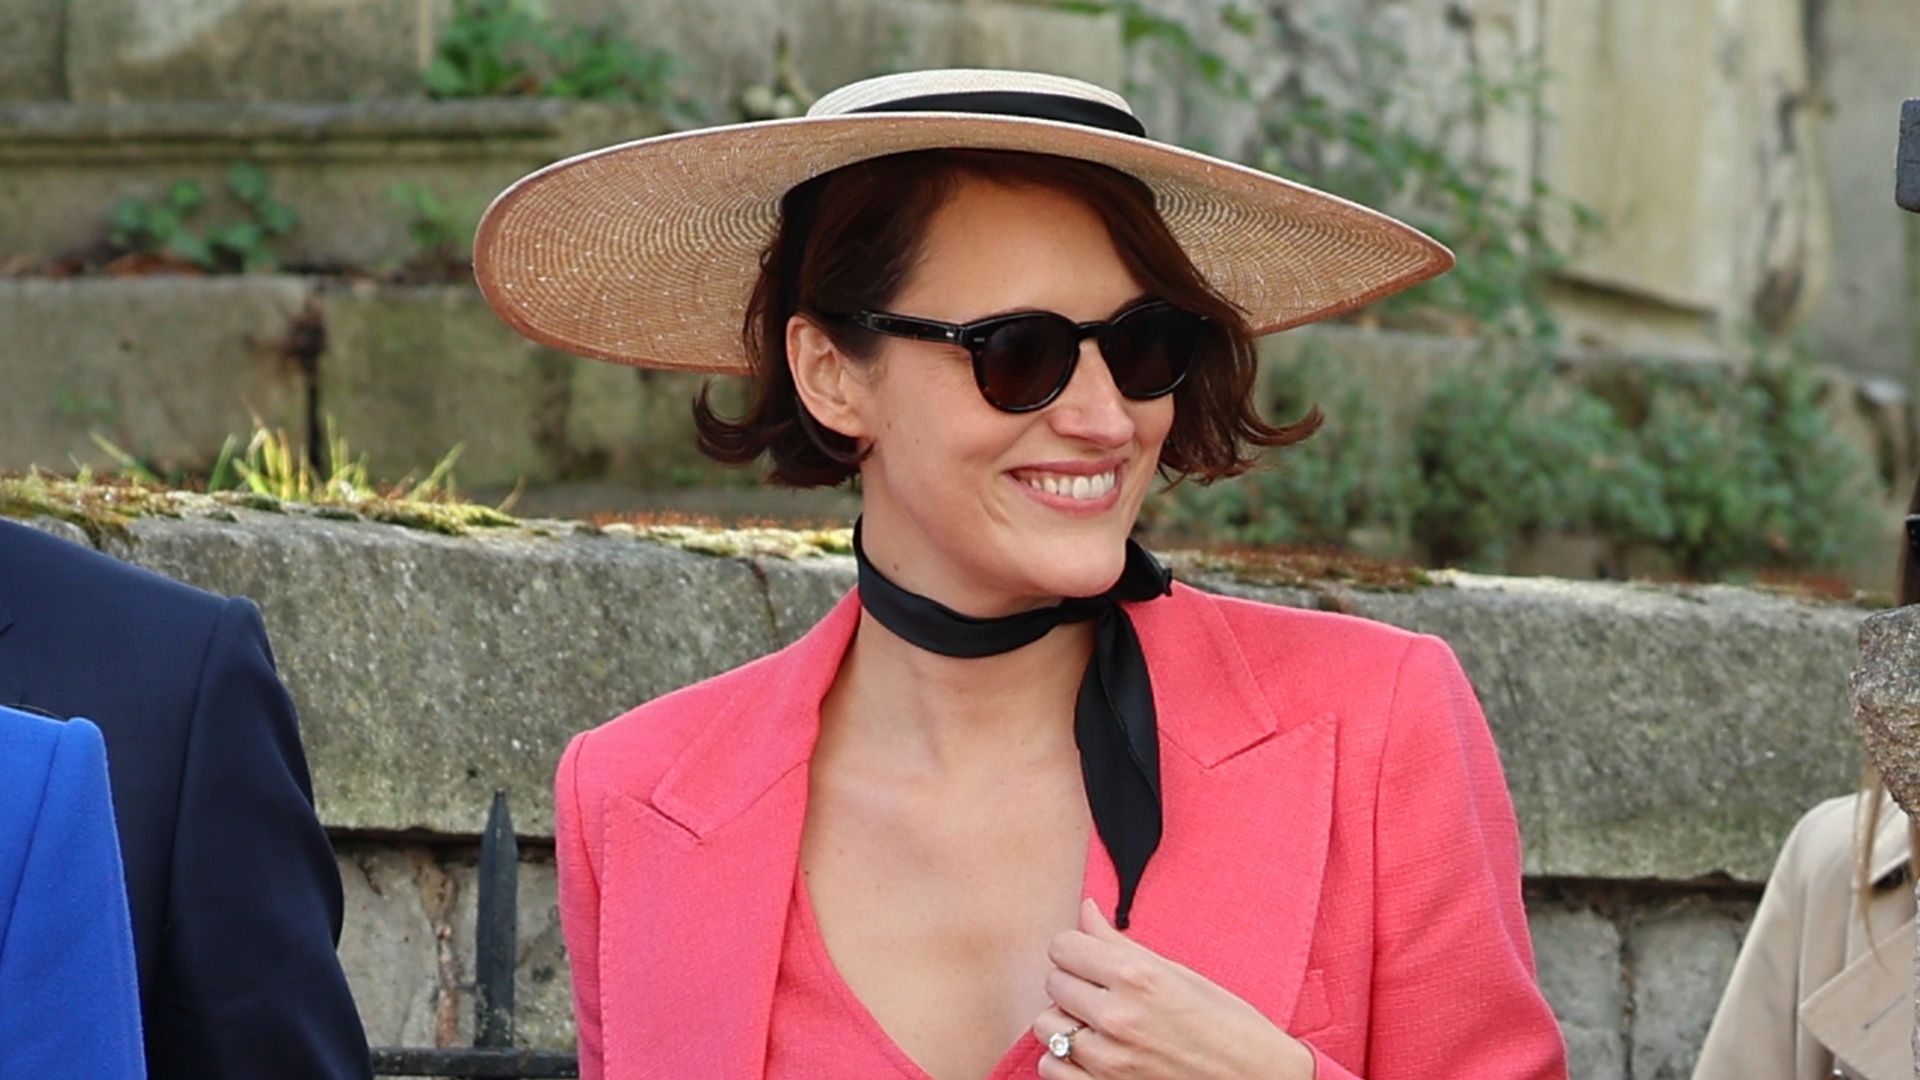 Phoebe Waller-Bridge wears a coral suit and boater hat